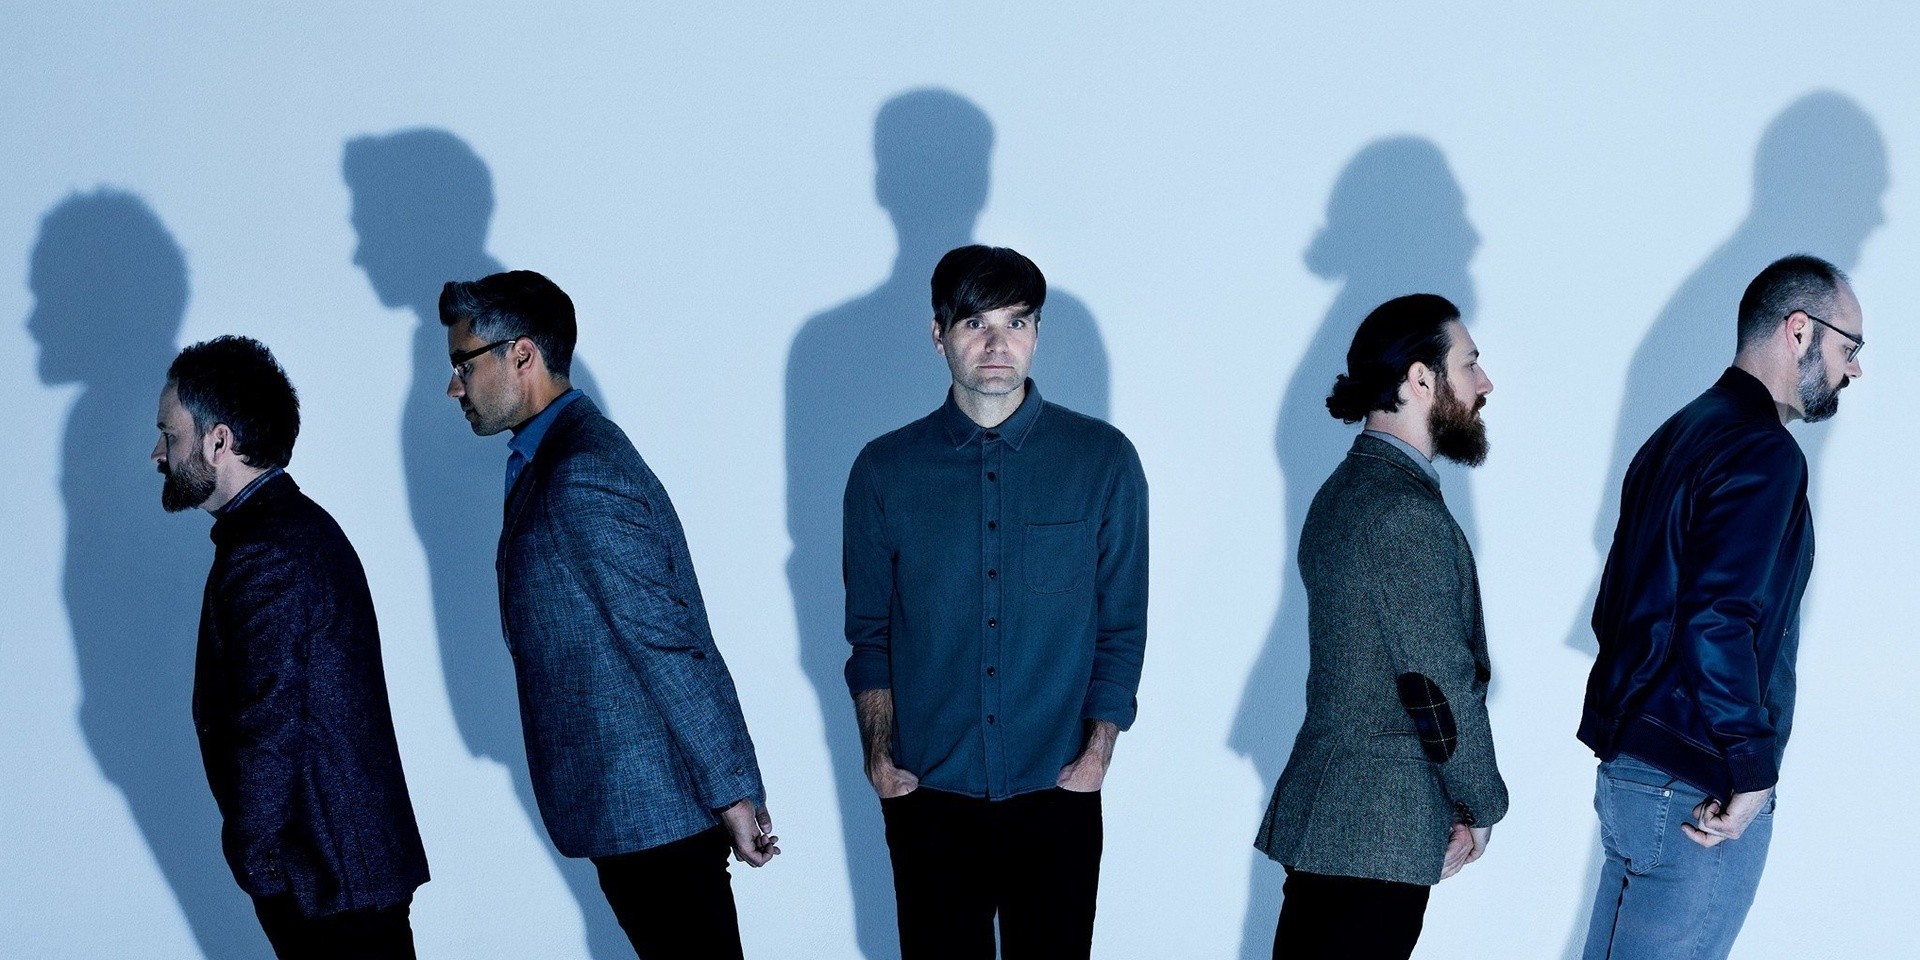 Death Cab For Cutie tease new music, hint at August release date – watch